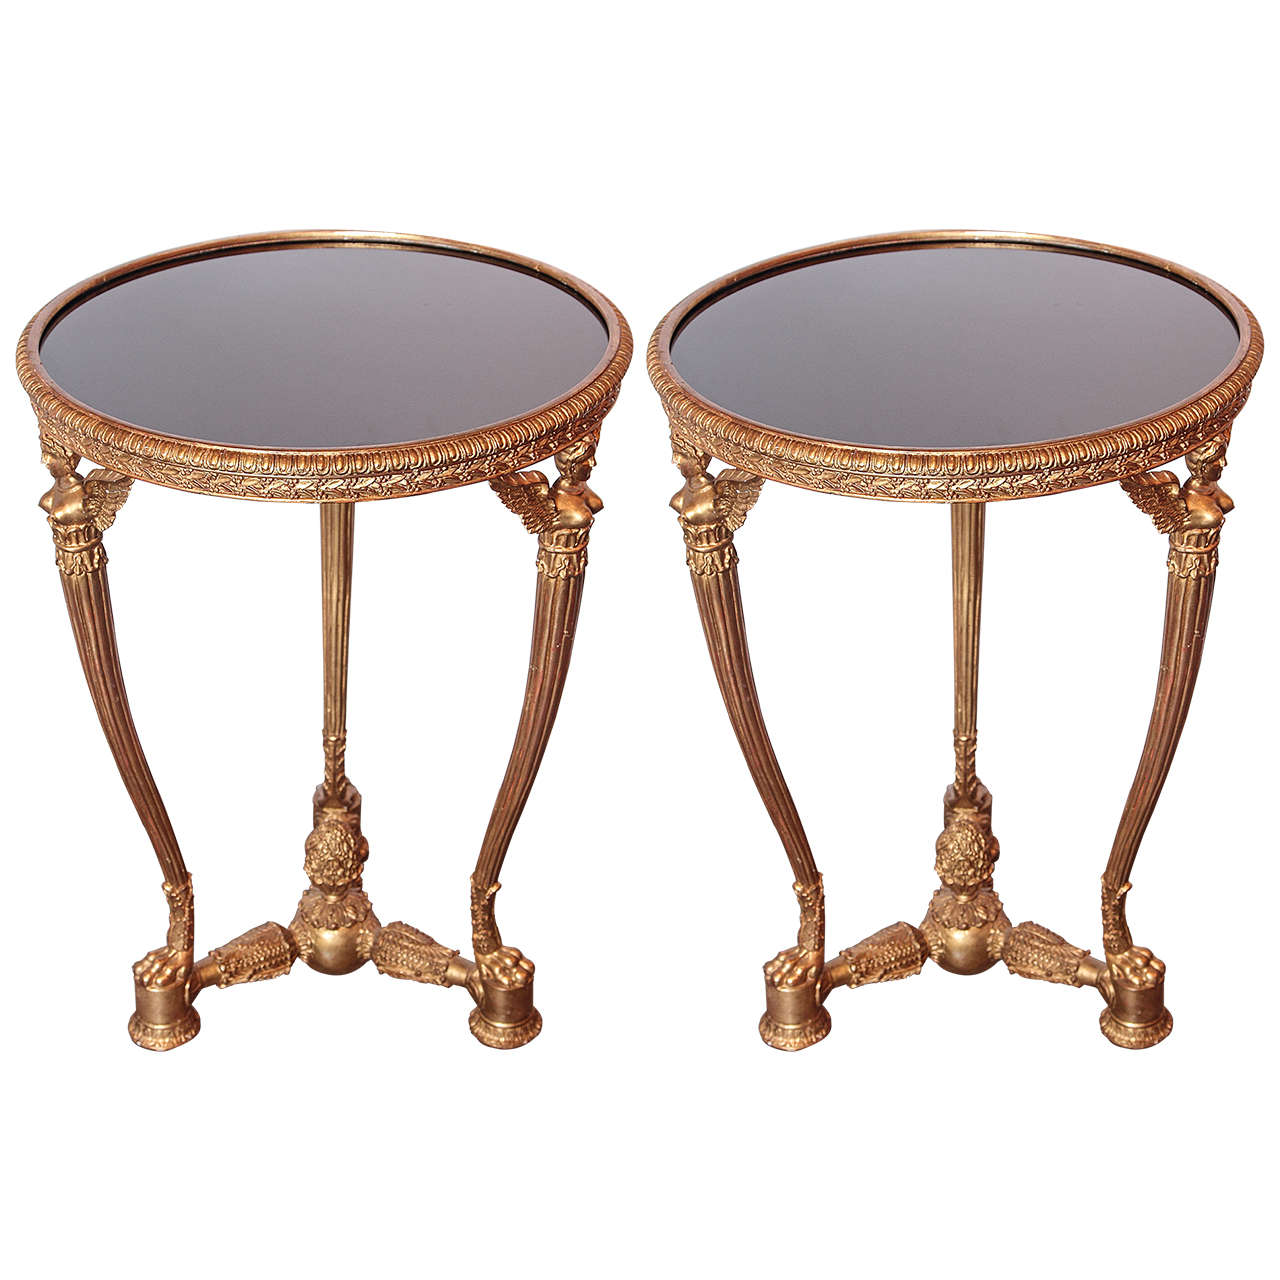 Pair of Empire style carved and gilt tables with glass tops